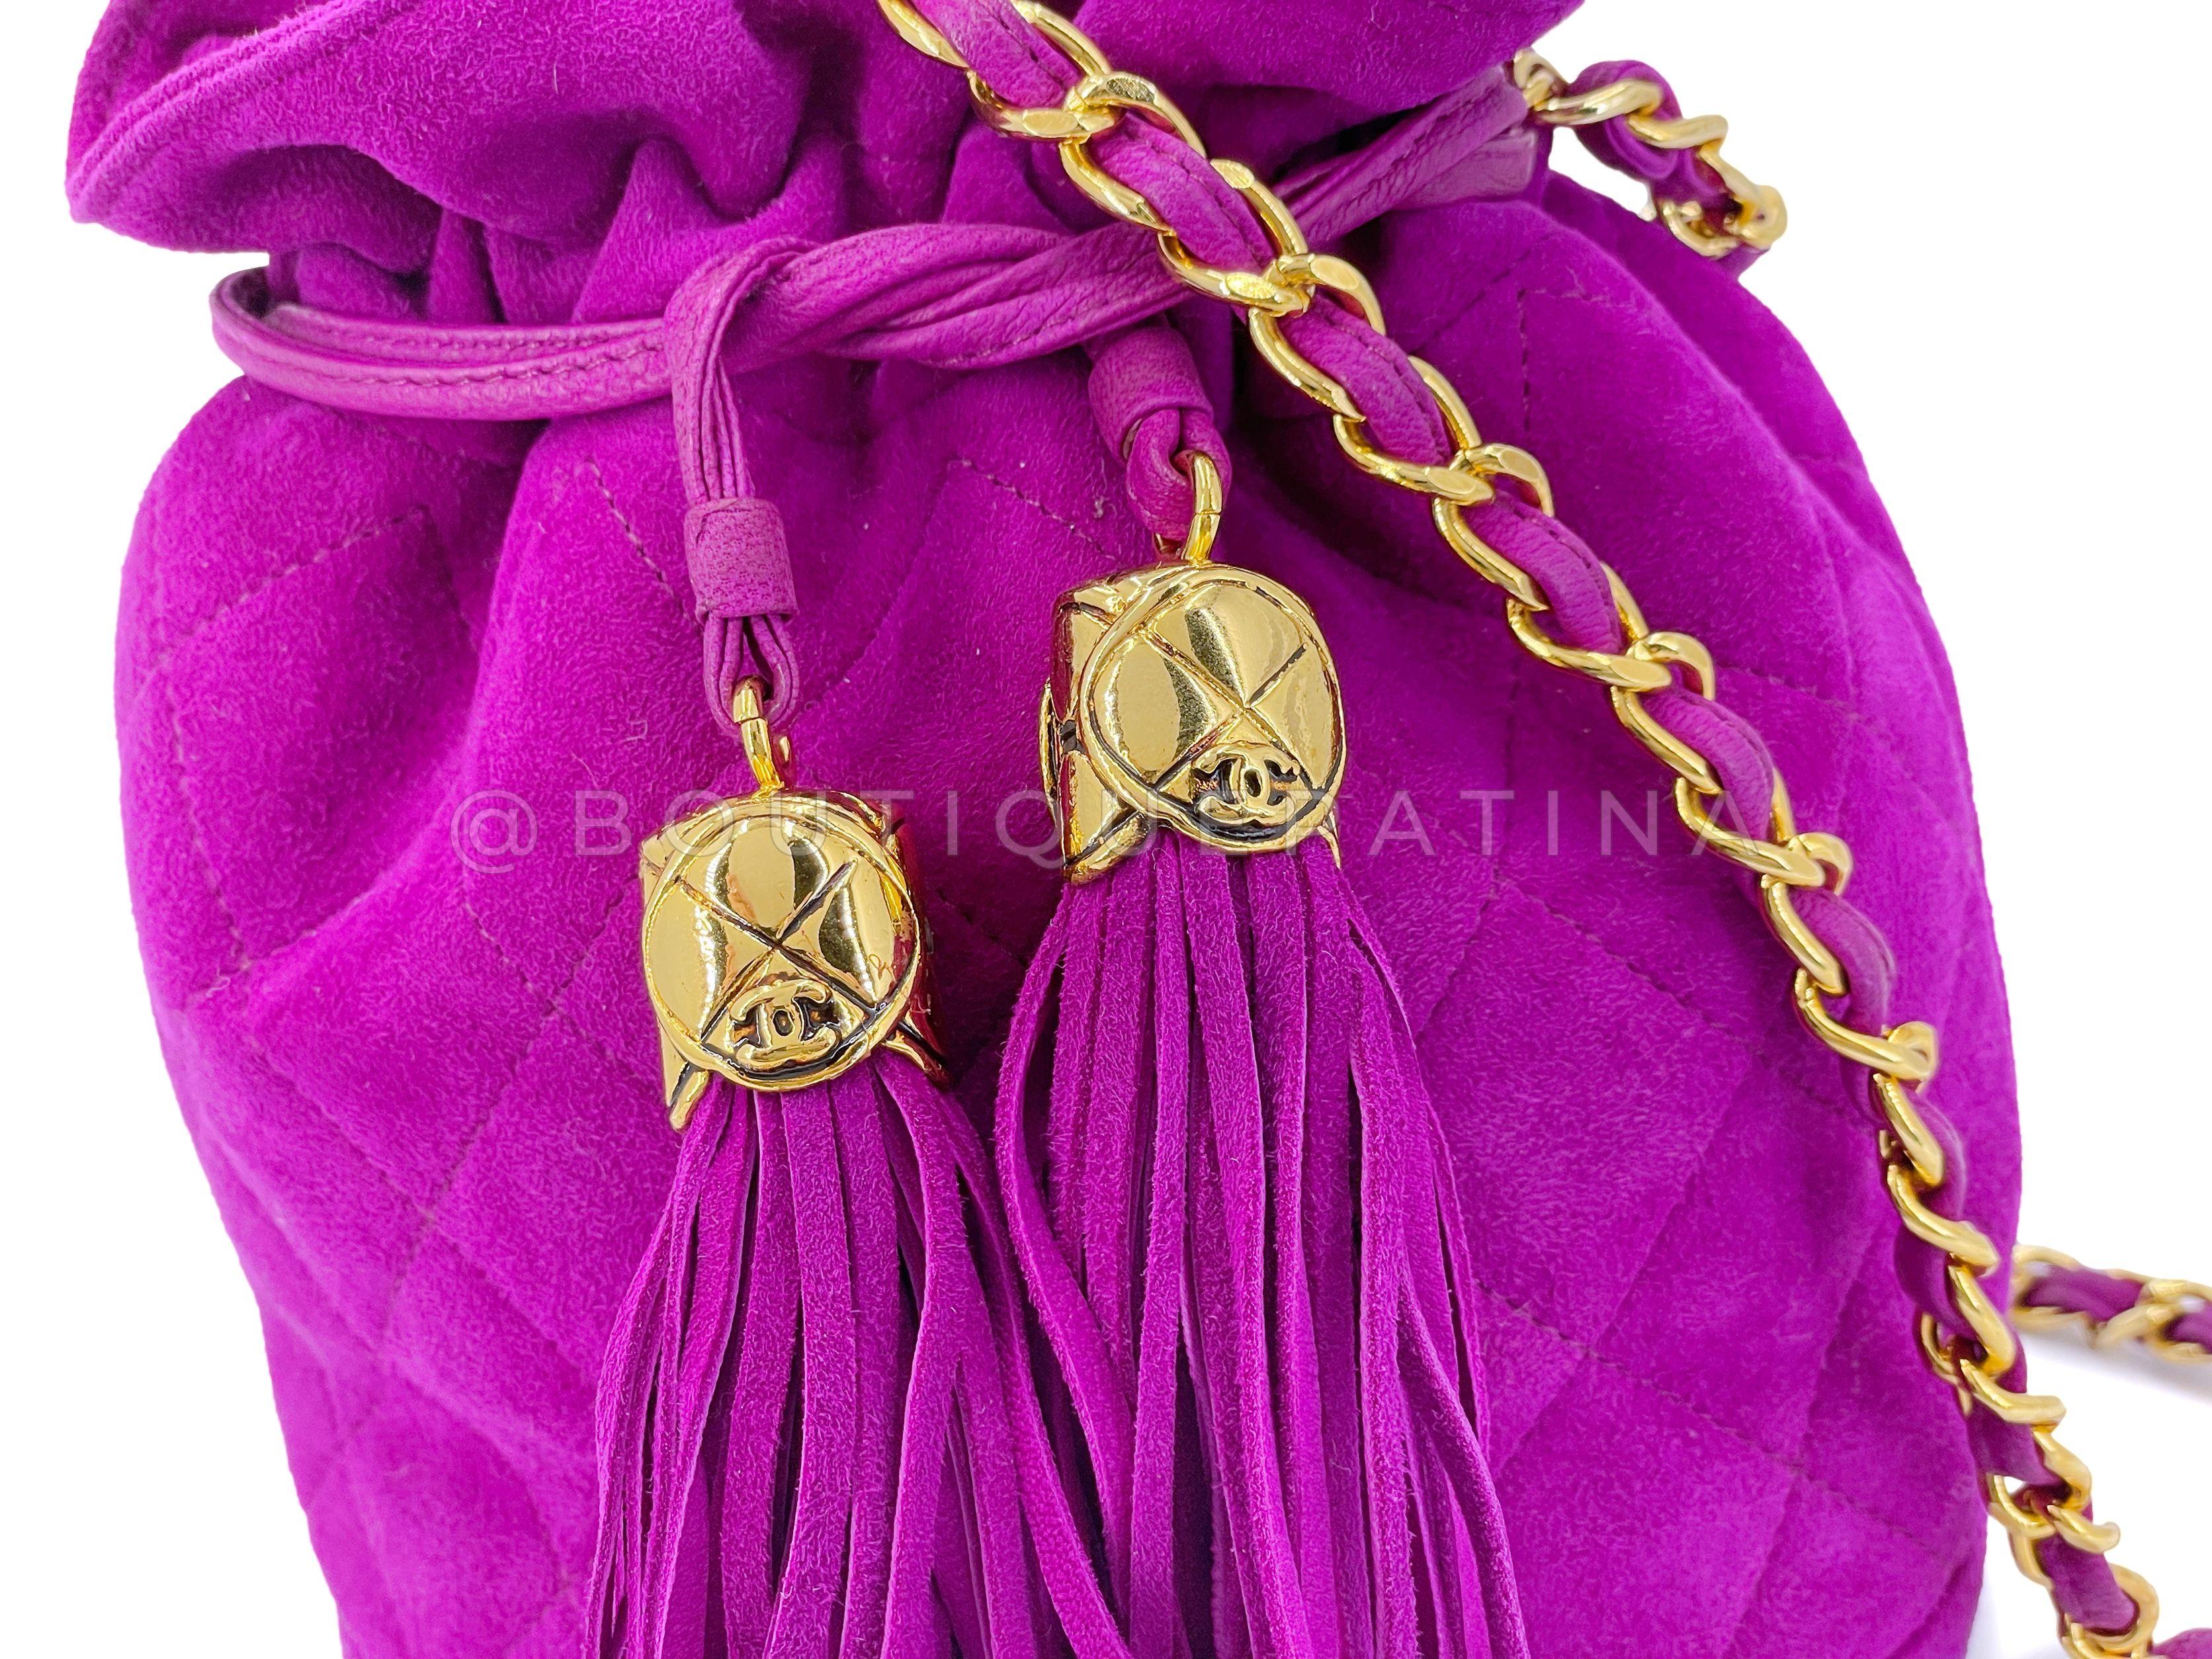 Rare Chanel 1990 Pink-Purple Suede Mini Drawstring Bucket Bag 24k GHW 67450 For Sale 3